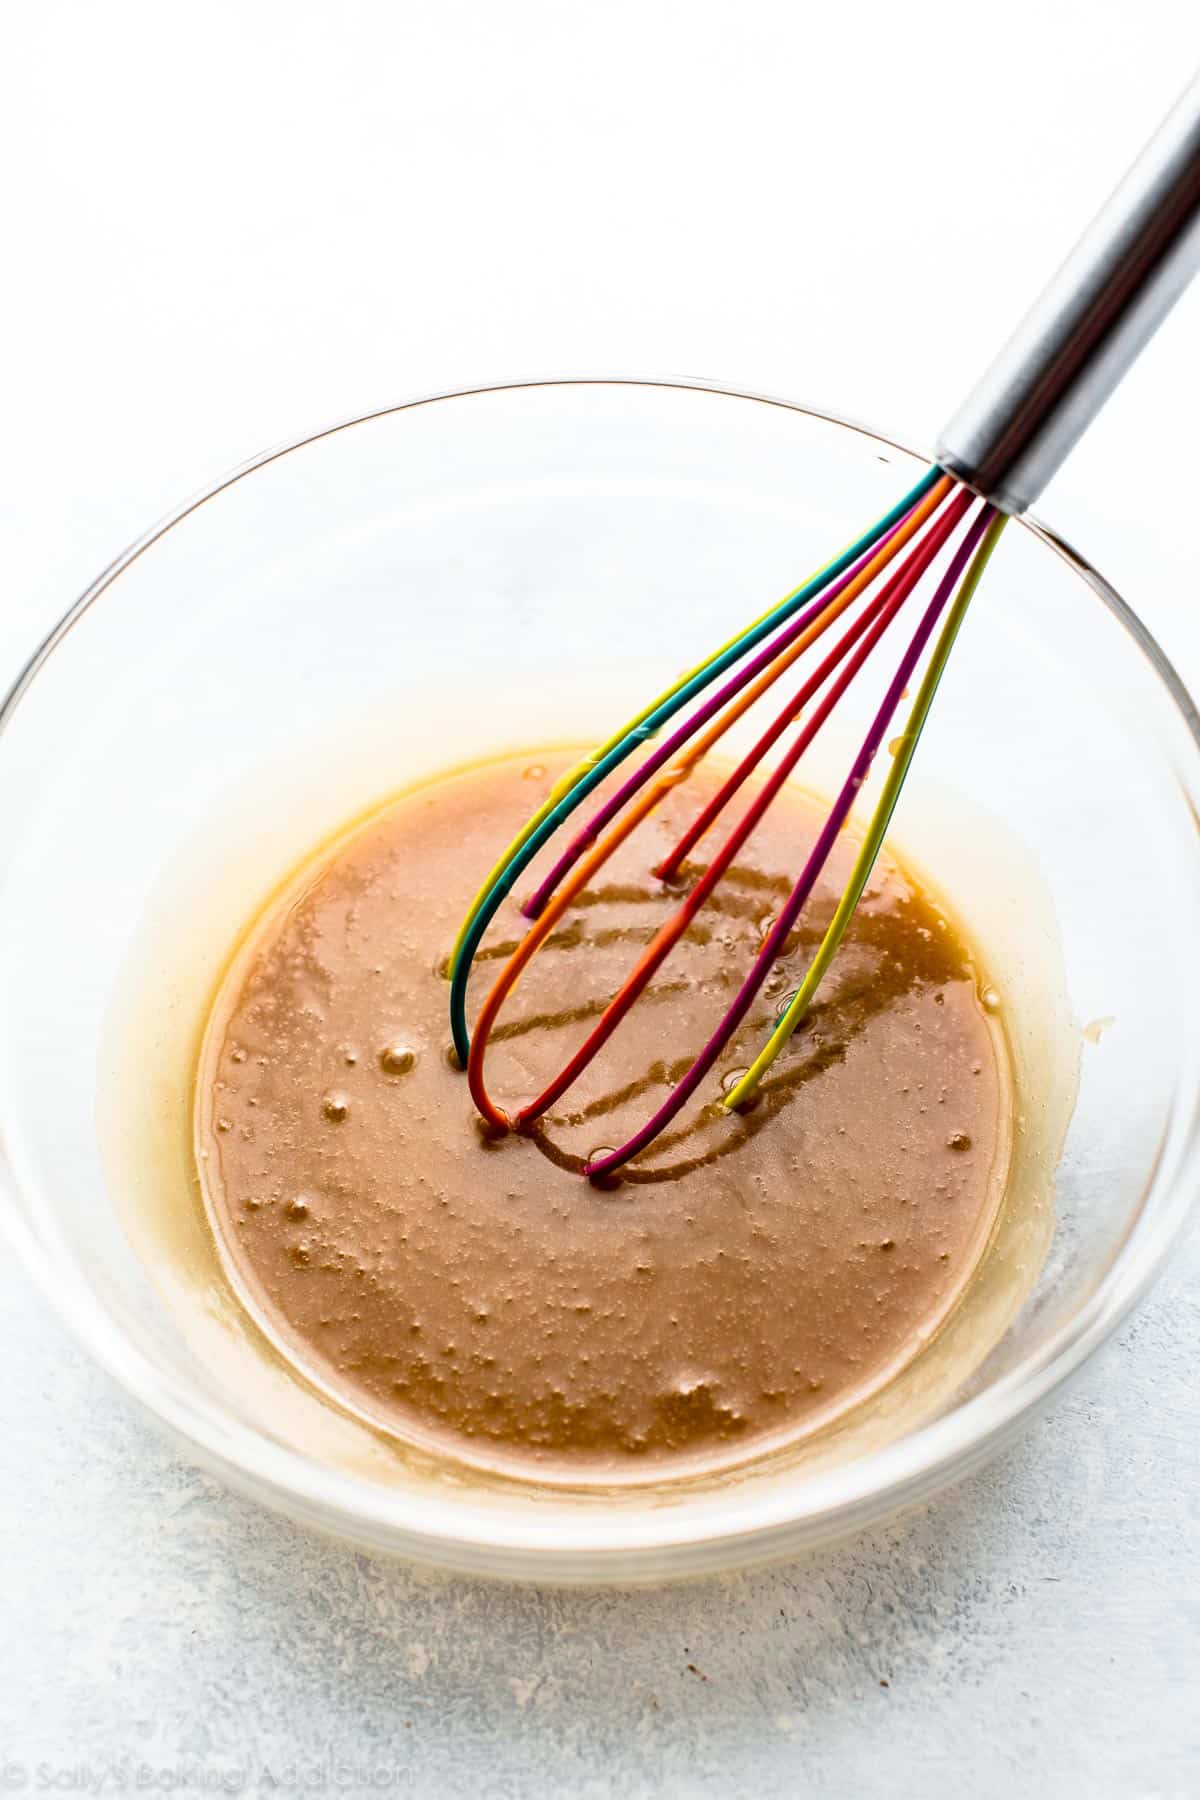 melted butter, sugar, cream, and salt in a glass bowl with a colorful whisk